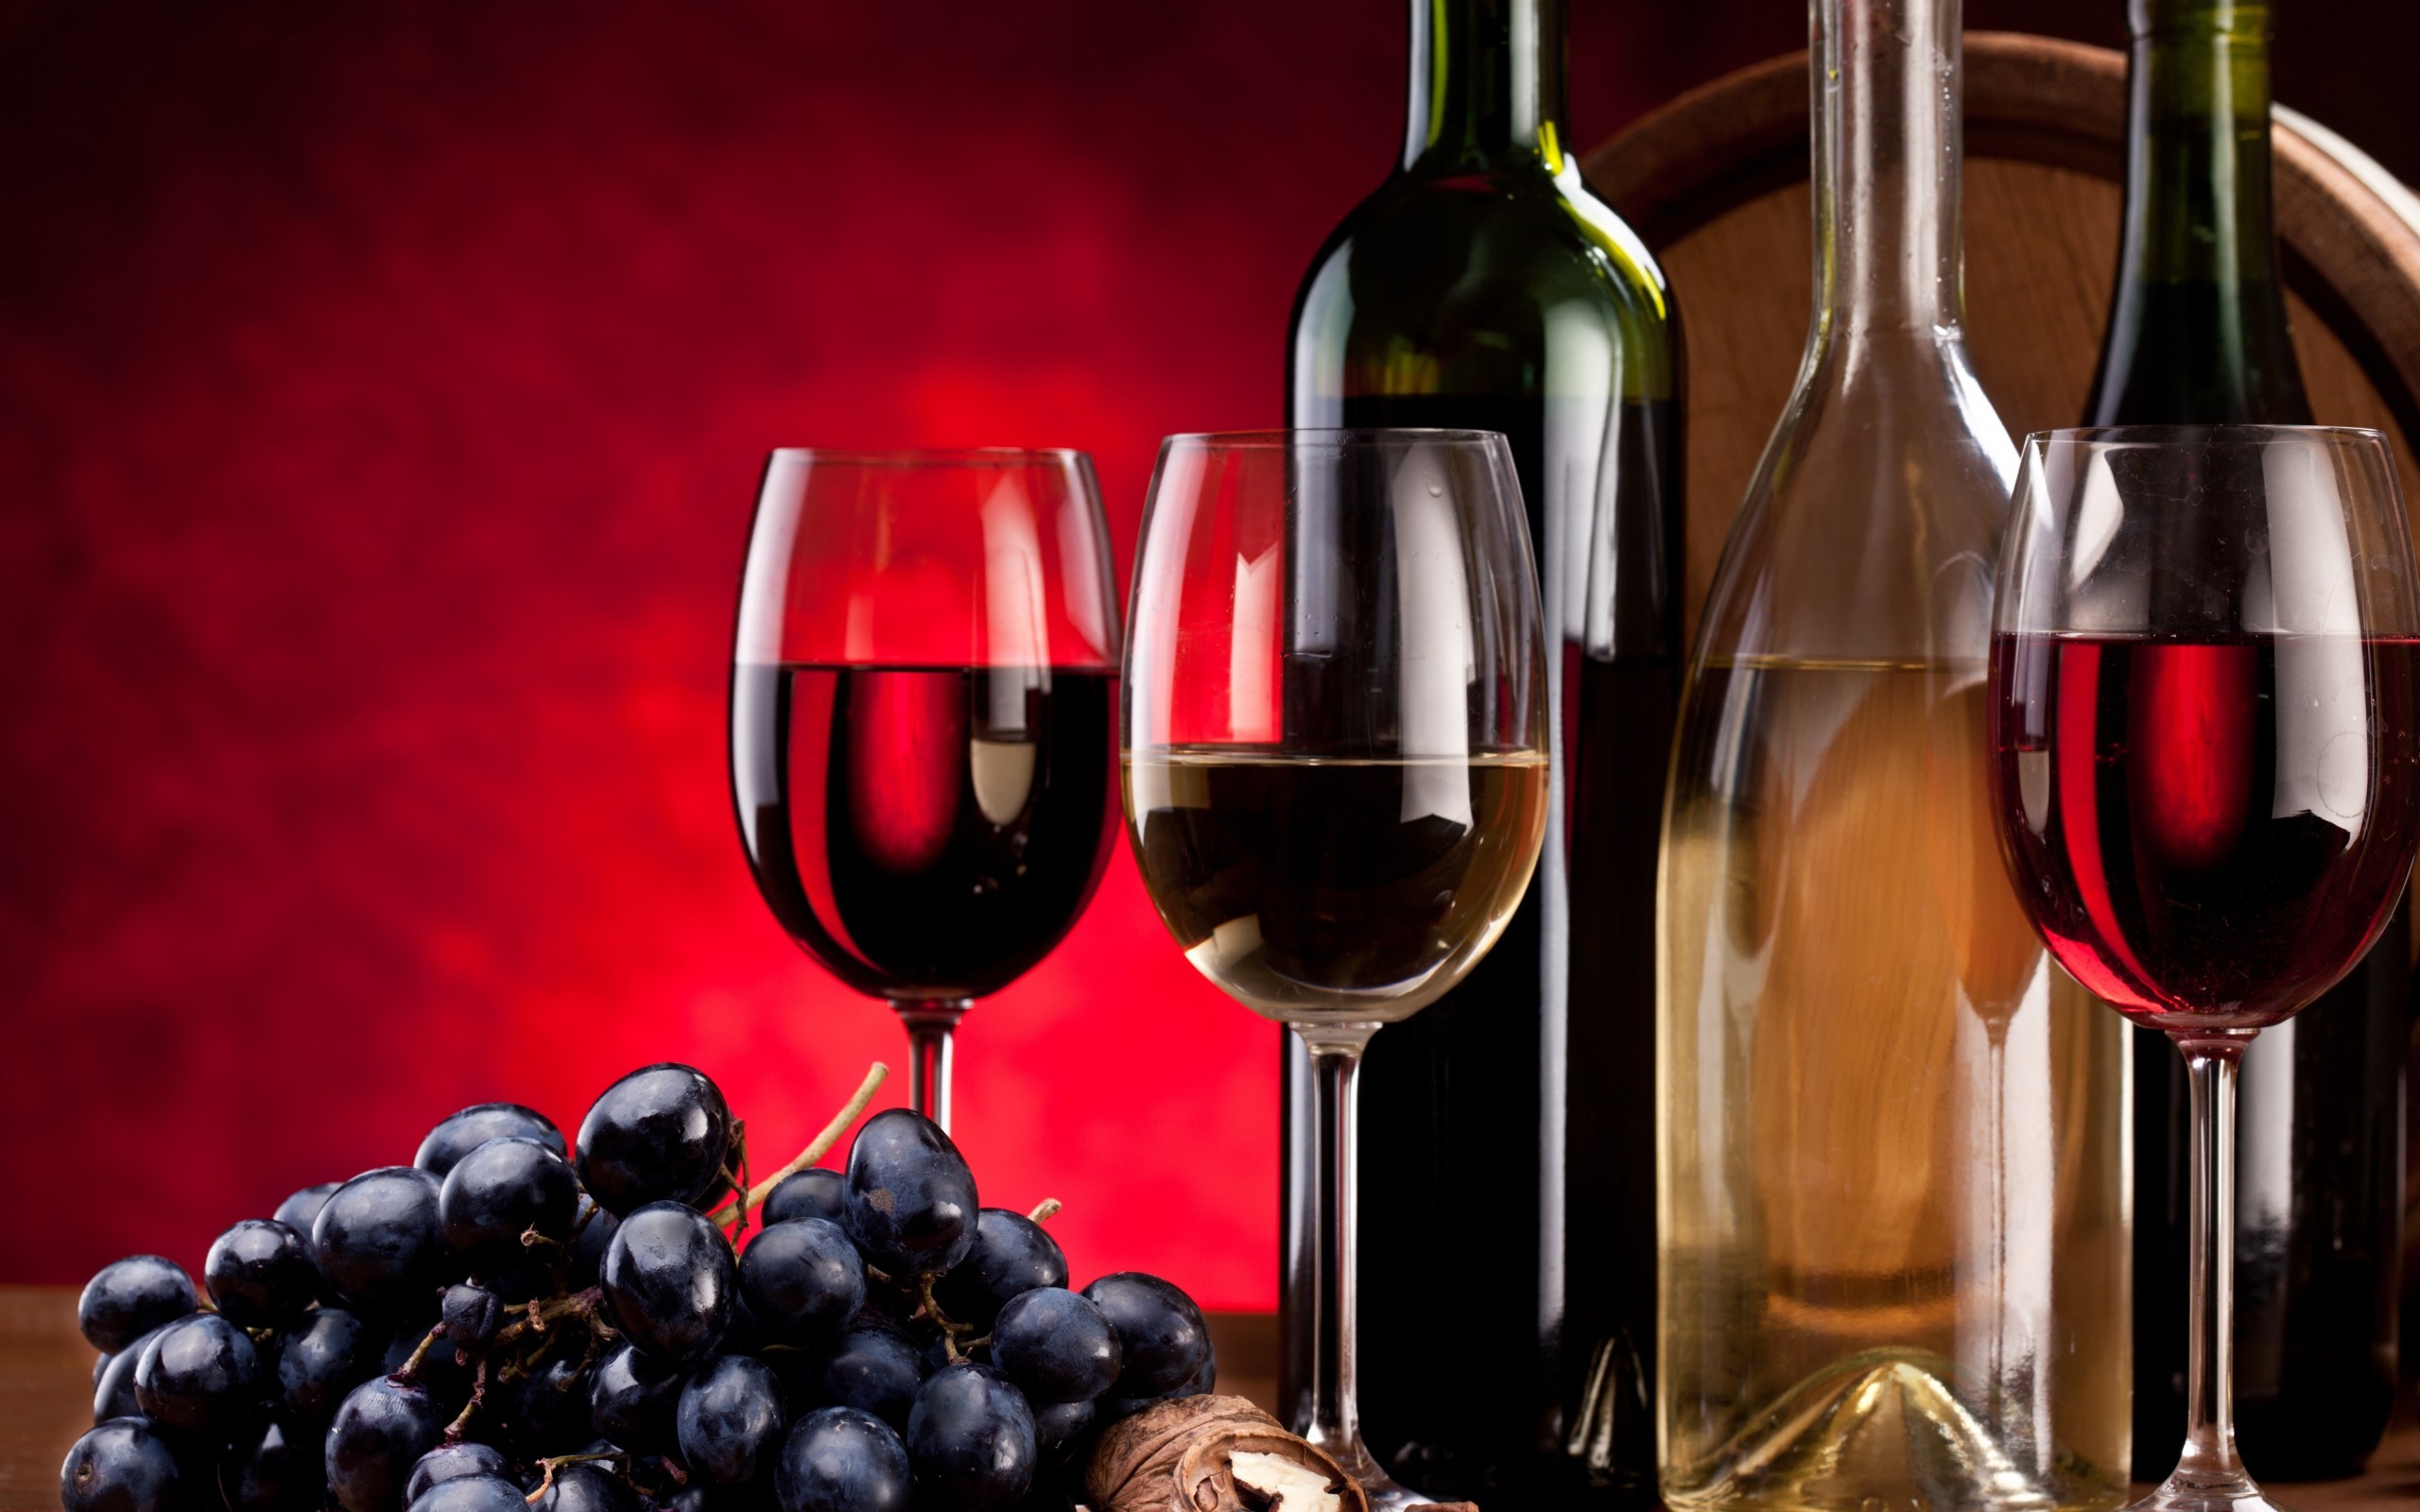 General 2560x1600 wine drink grapes drinking glass red wine food fruit berries bottles still life red background alcohol